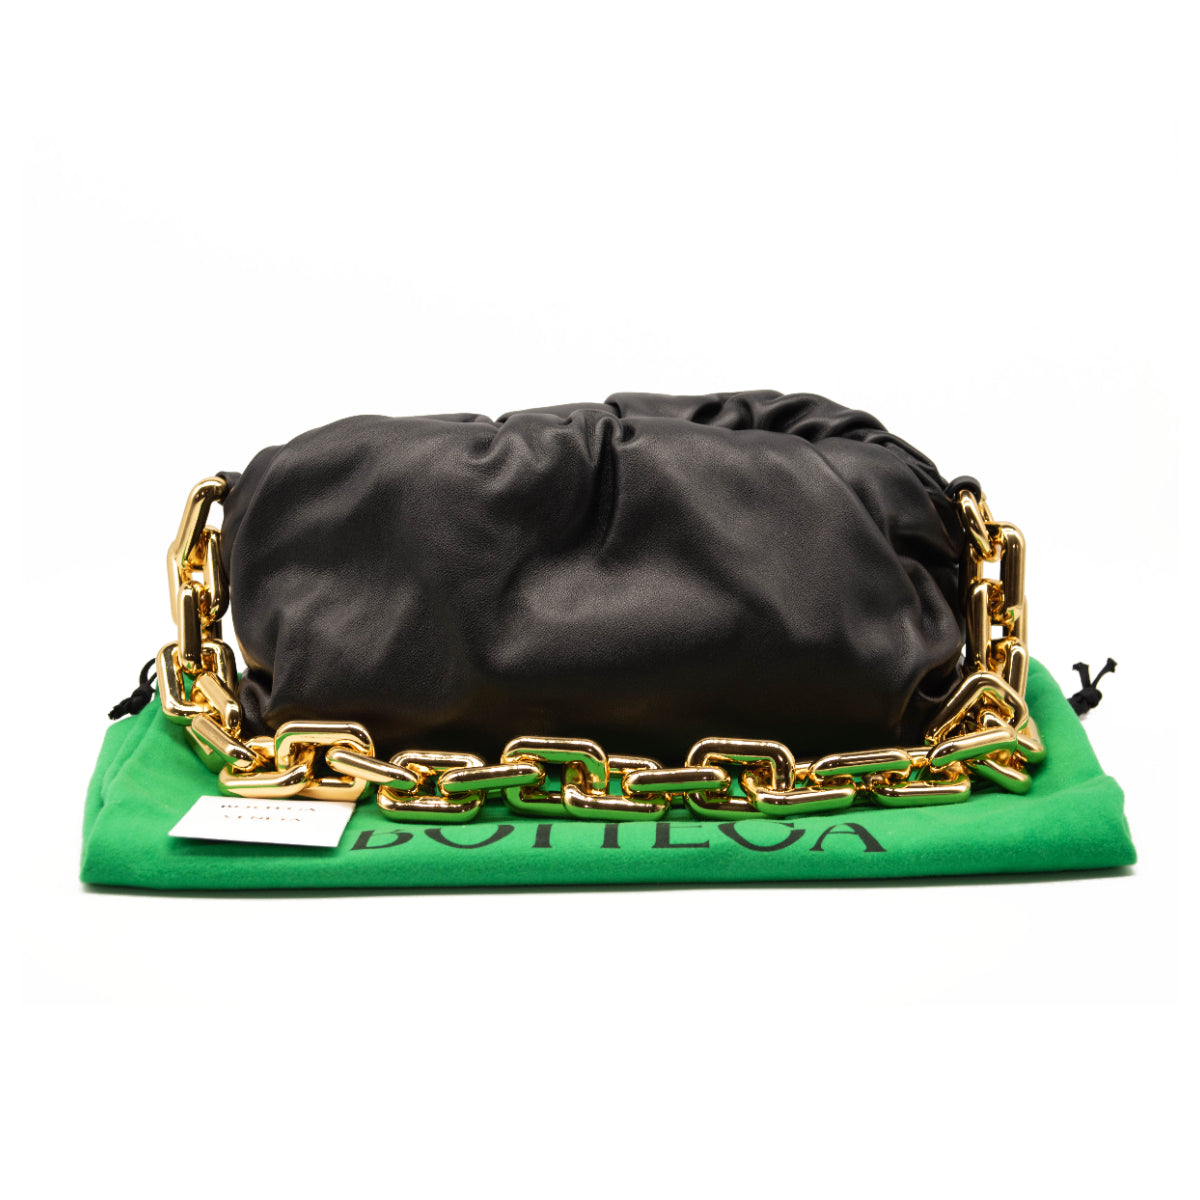 The Chain Pouch Leather Shoulder Bag